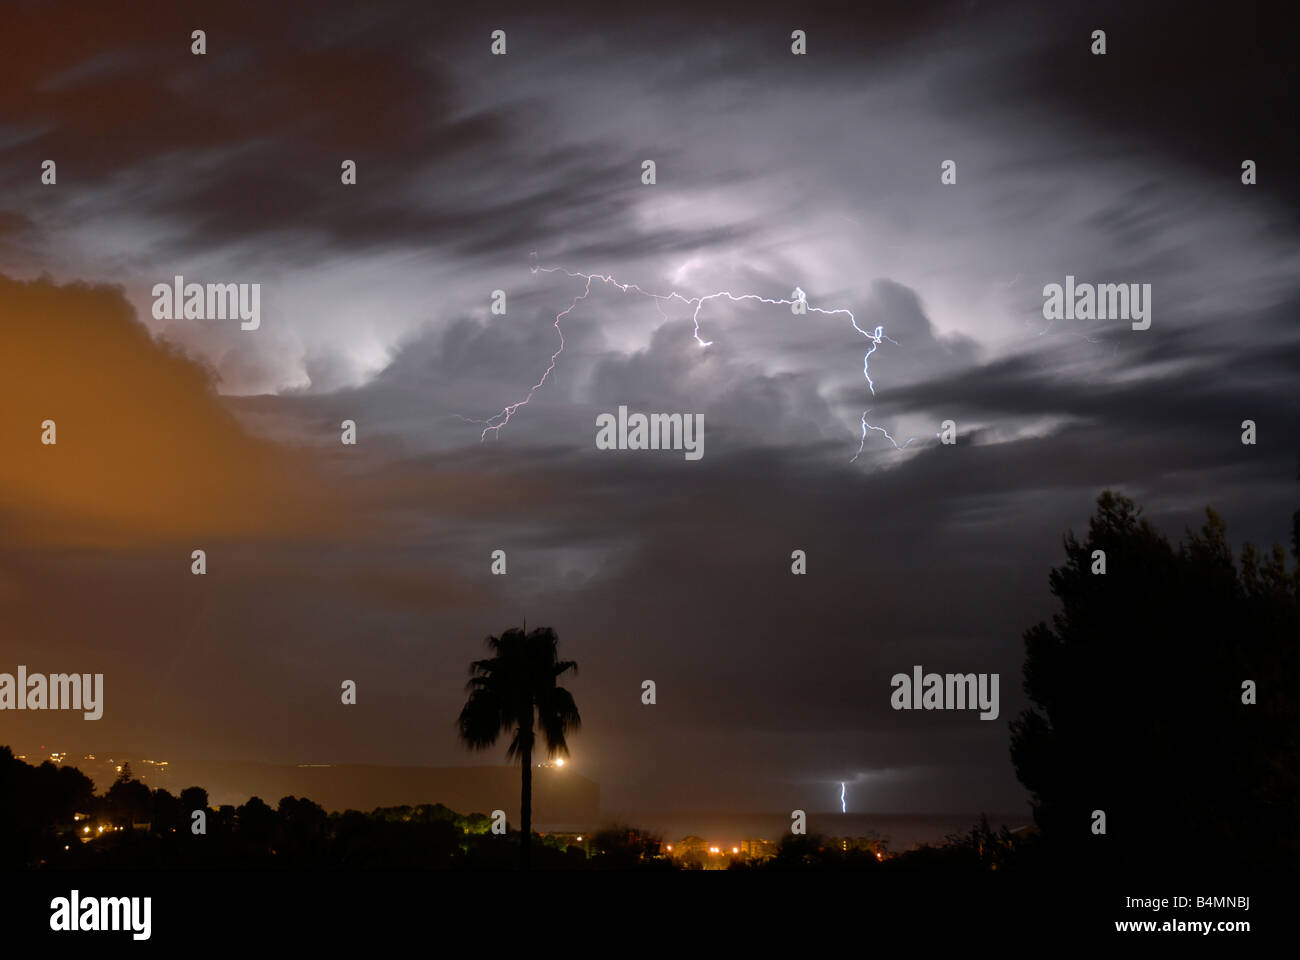 Fork lightning and storm clouds lit up at night, Javea / Xabia,  Alicante Province, Comunidad Valenciana, Spain Stock Photo